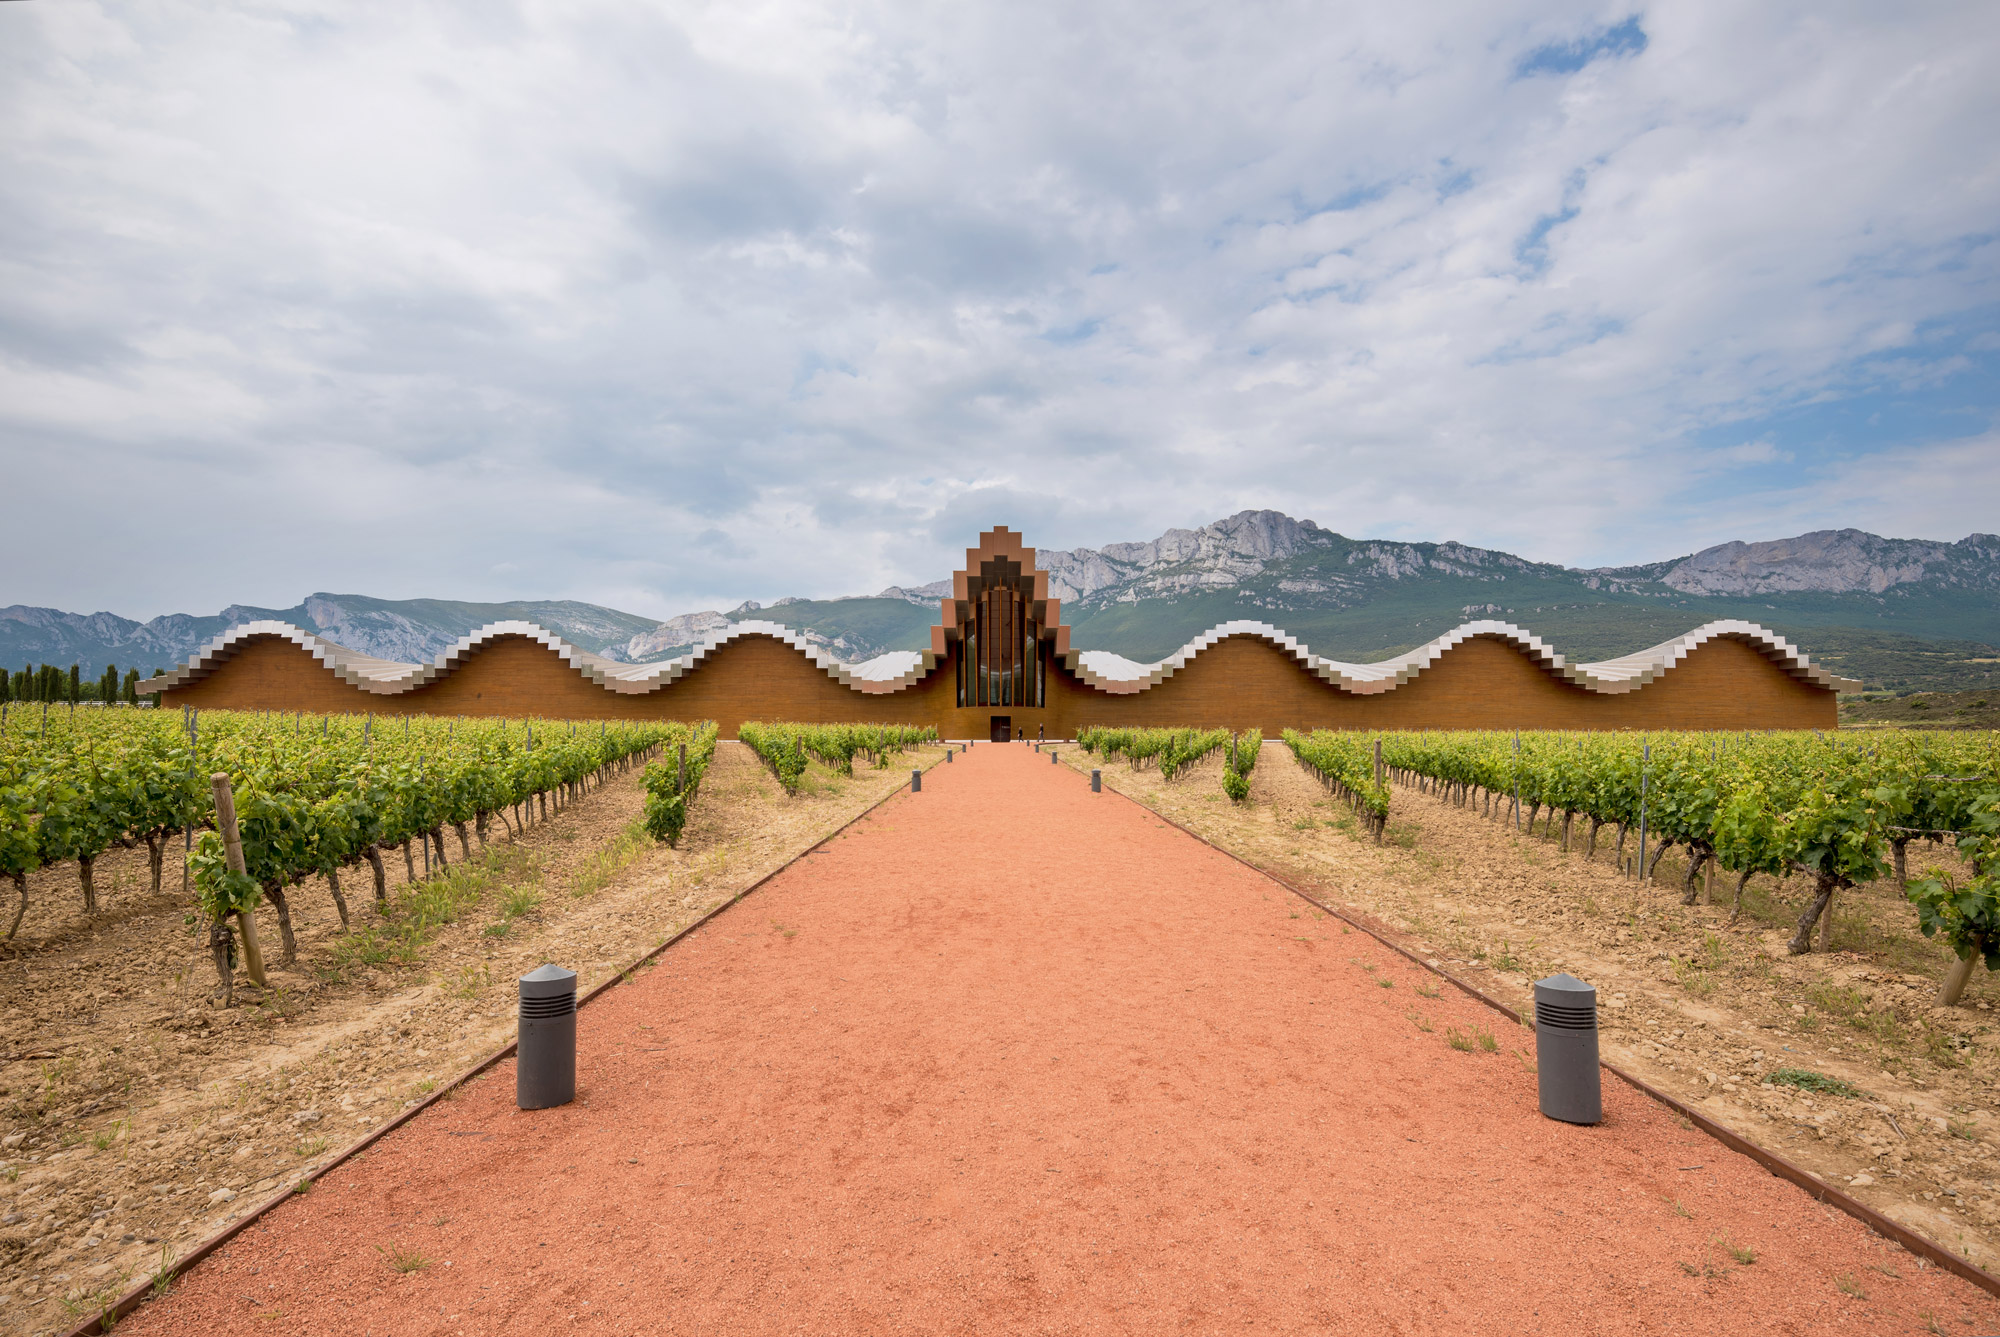 Undulating architecture set against a mountain backdrop